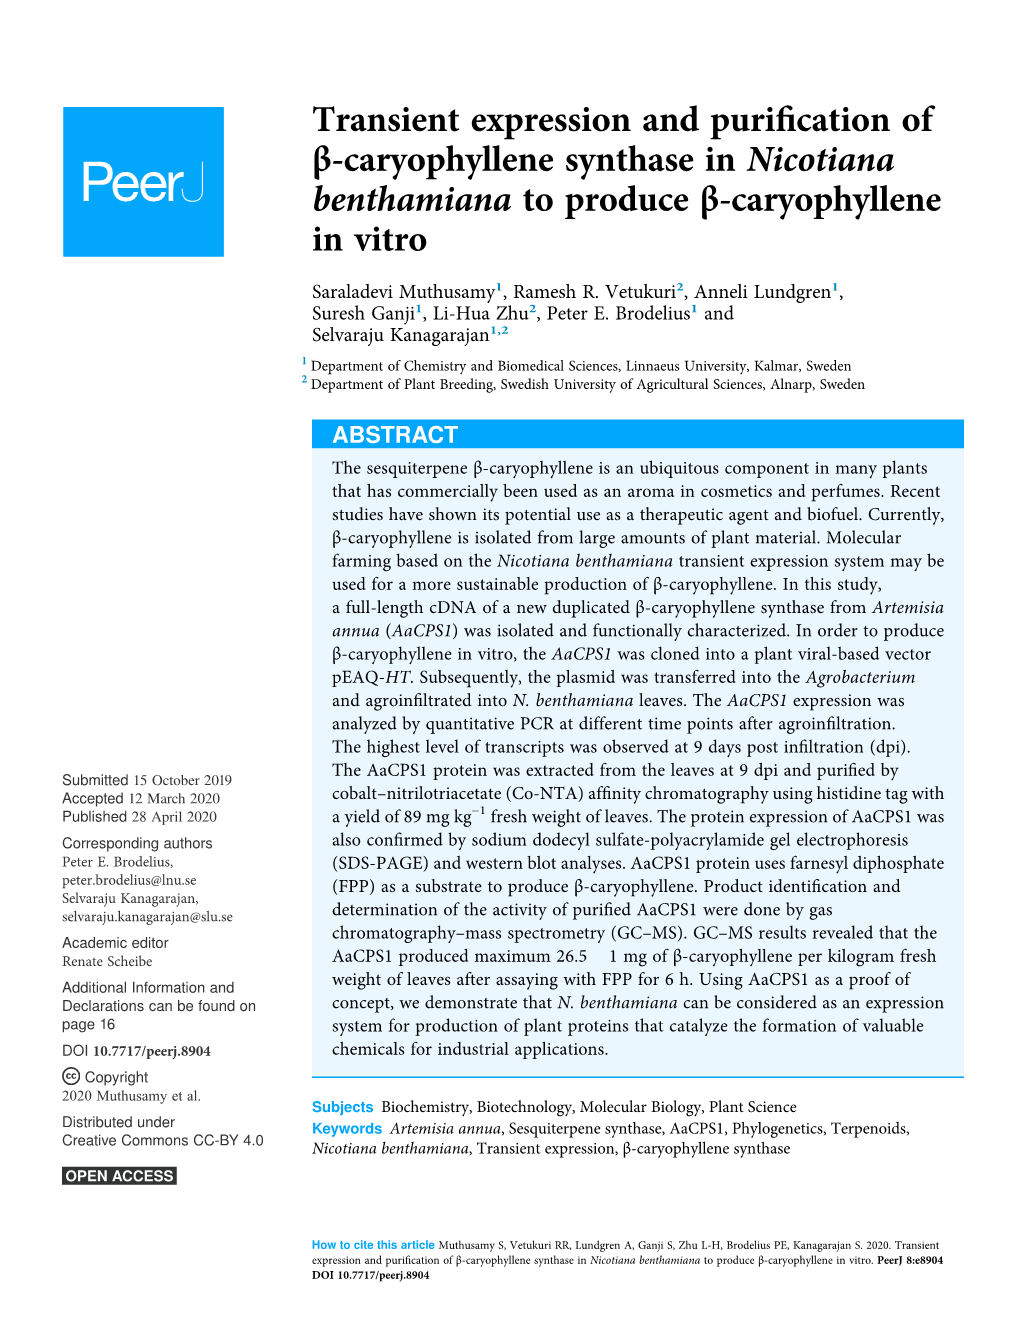 Transient Expression and Purification of Β-Caryophyllene Synthase in Nicotiana Benthamiana to Produce Β-Caryophyllene in Vitro